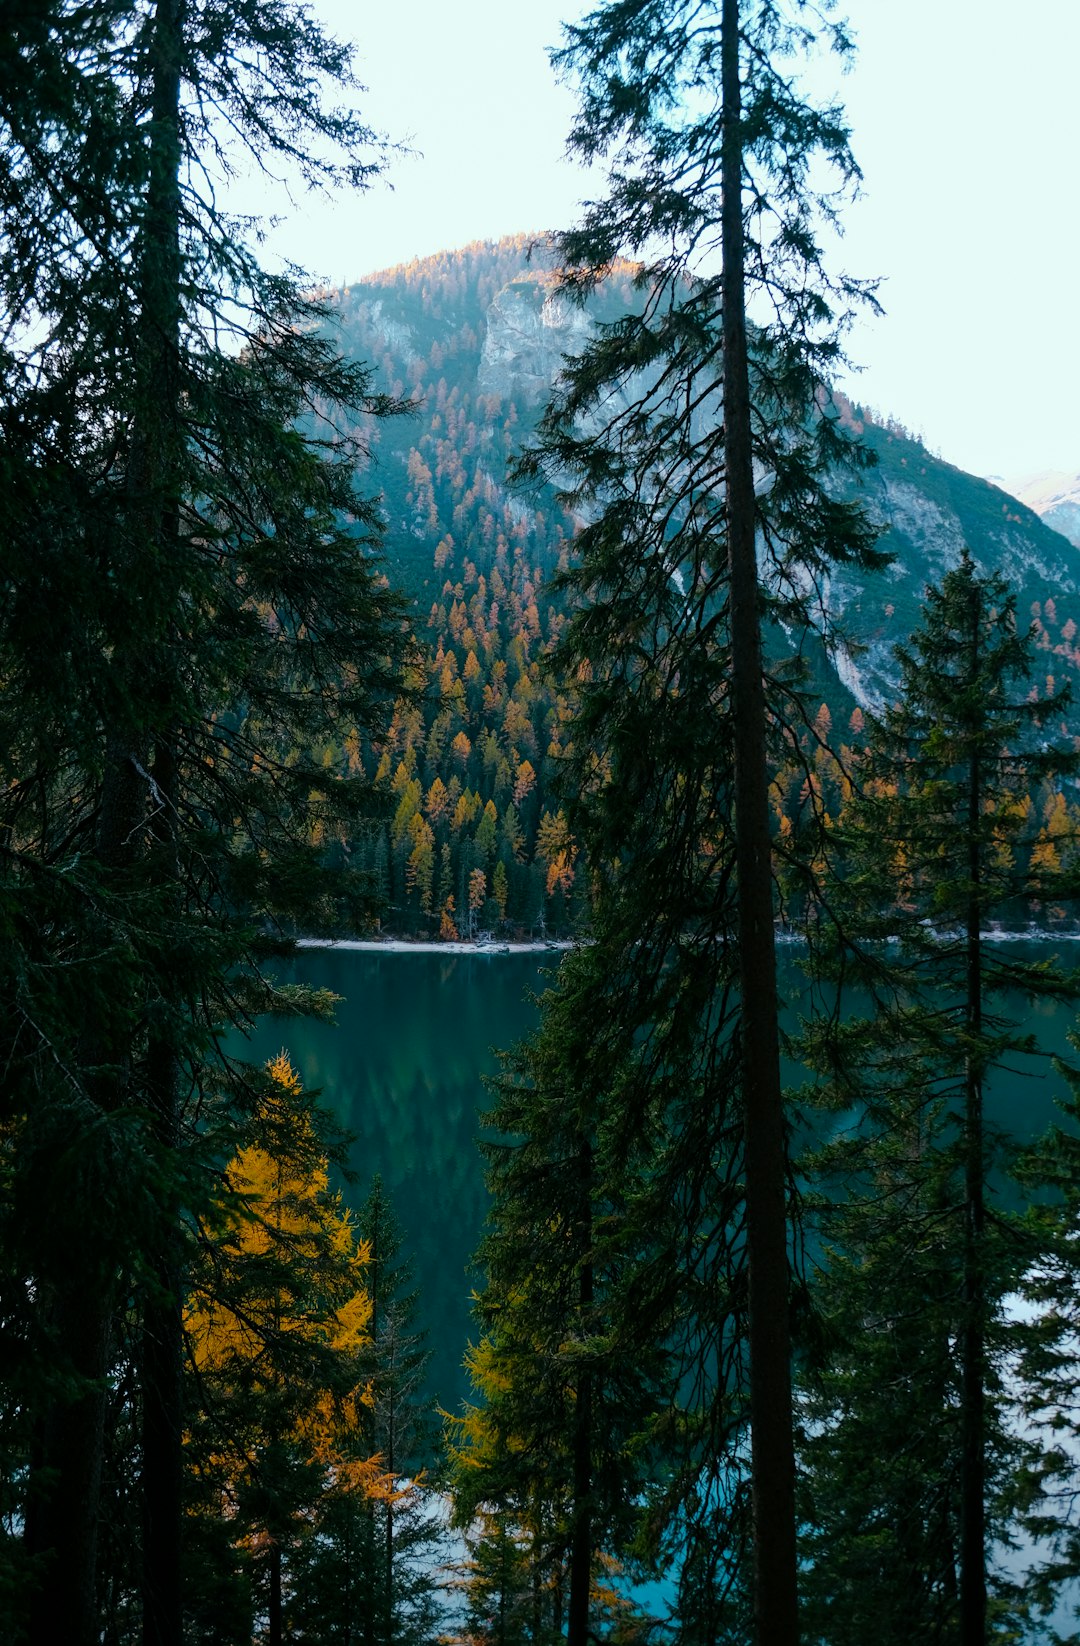 Tropical and subtropical coniferous forests photo spot Lago di Braies Merano